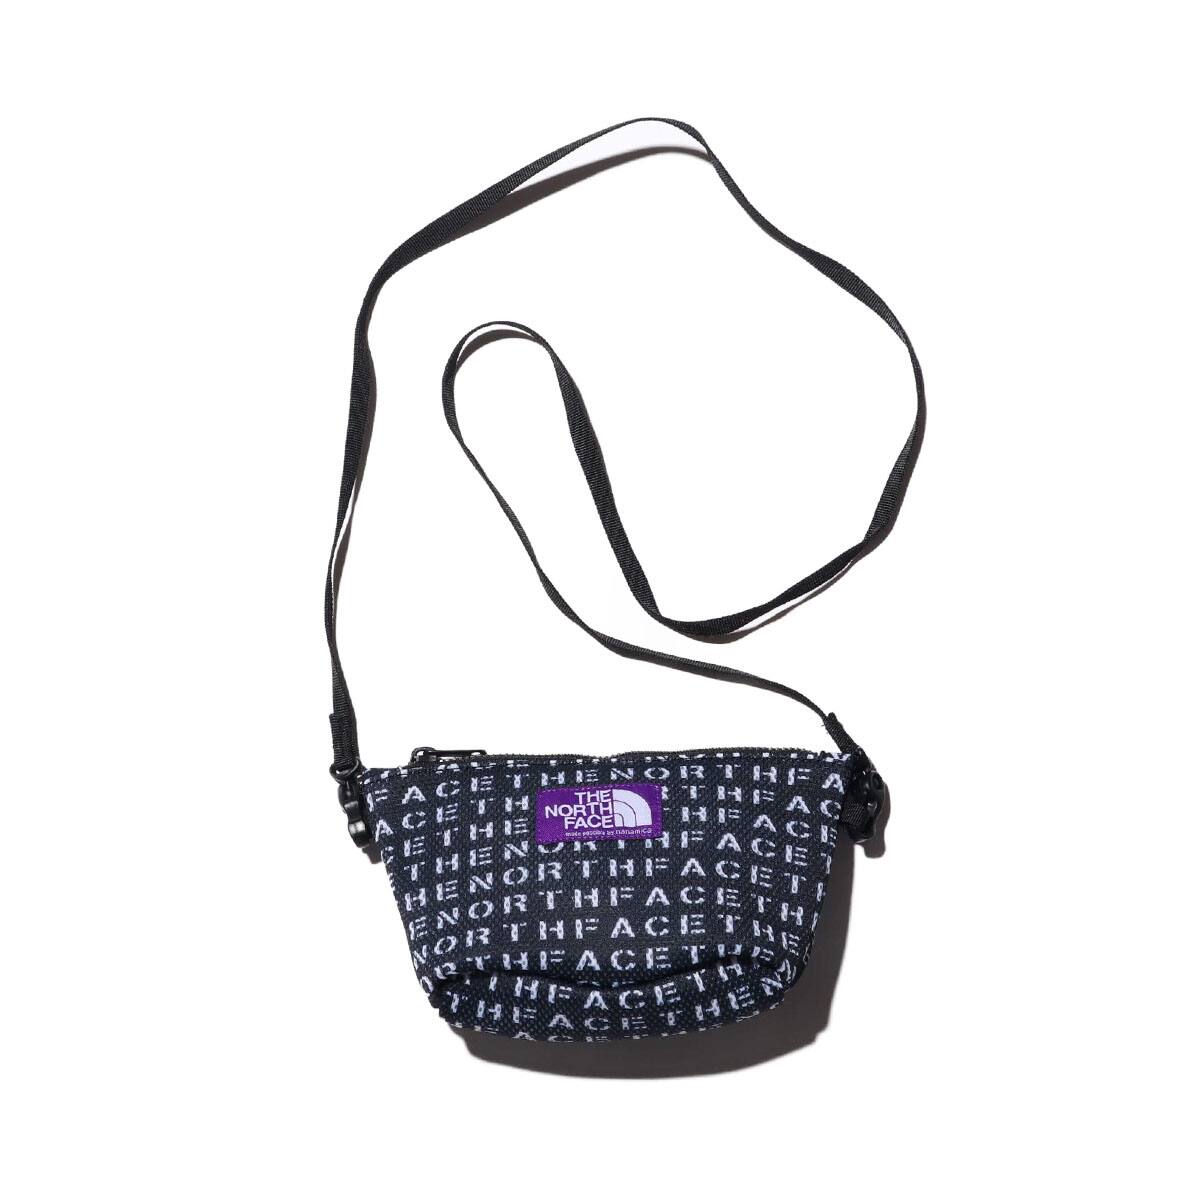 the north face purple label mesh pouch s